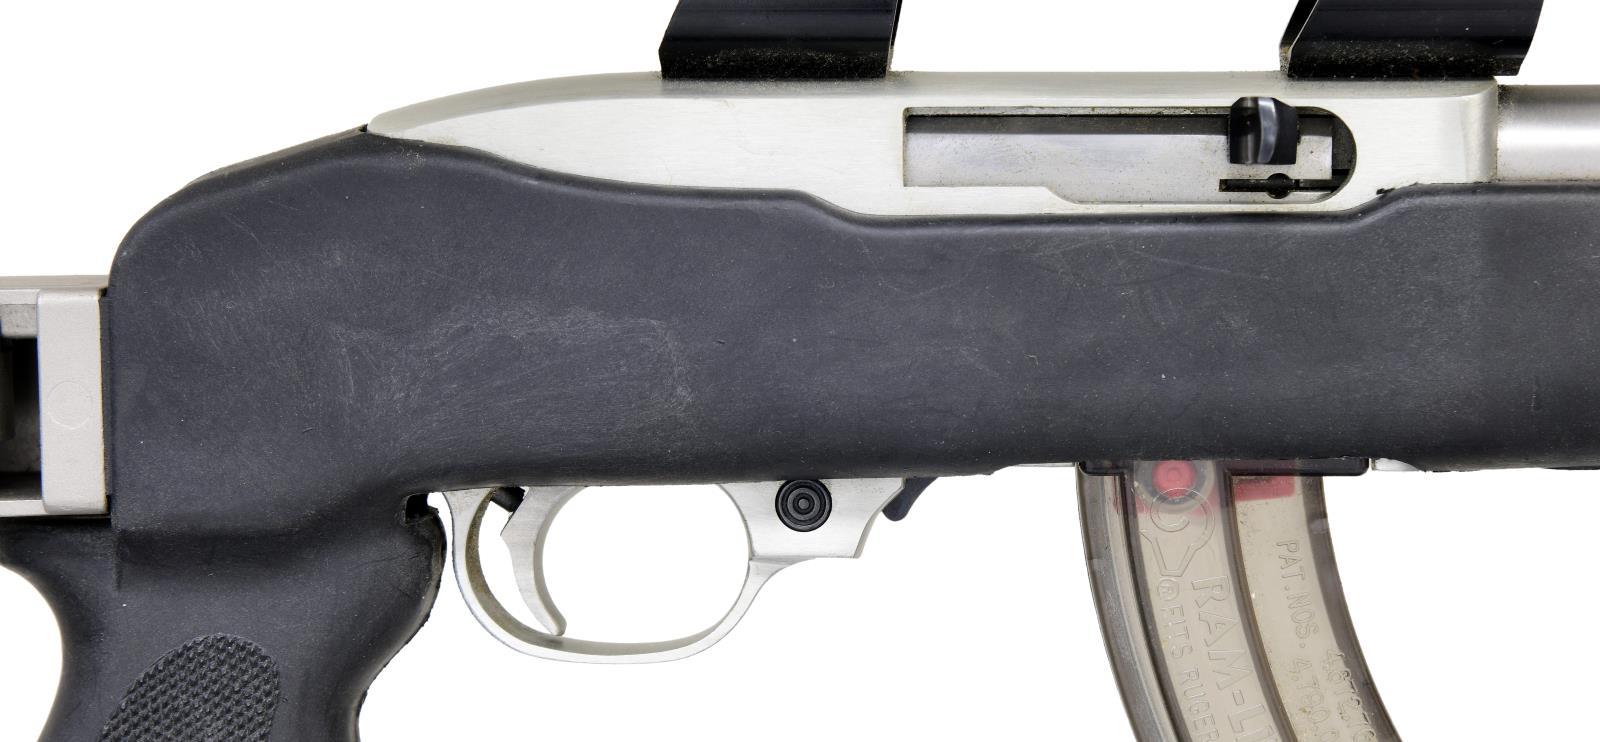 RUGER STAINLESS MODEL 10/22 SEMI-AUTO CARBINE.